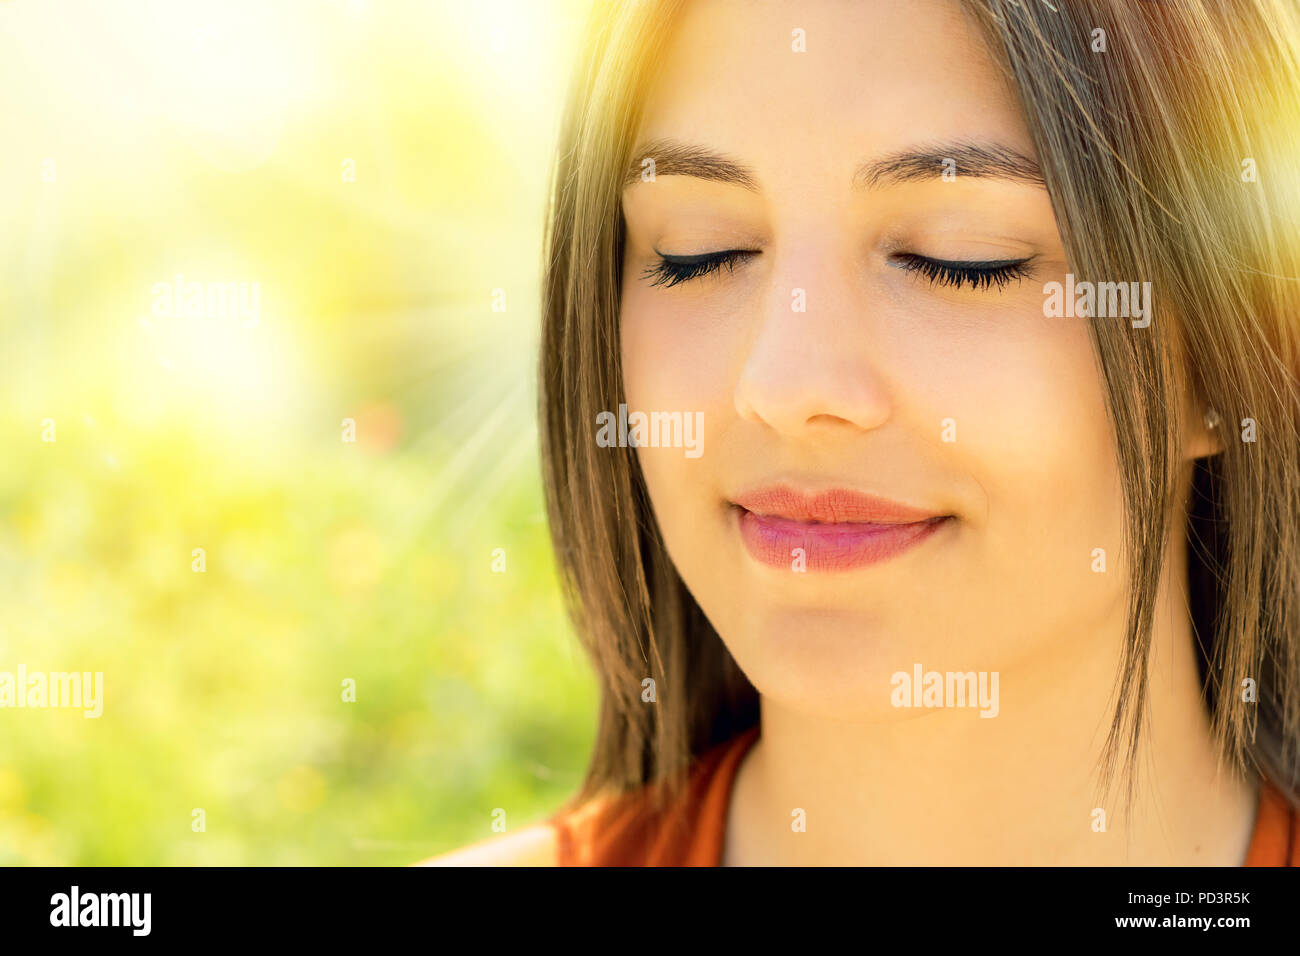 Close up portrait of attractive relaxed young woman meditating outdoors.Girl with eyes closed against bright colorful outdoor background. Stock Photo